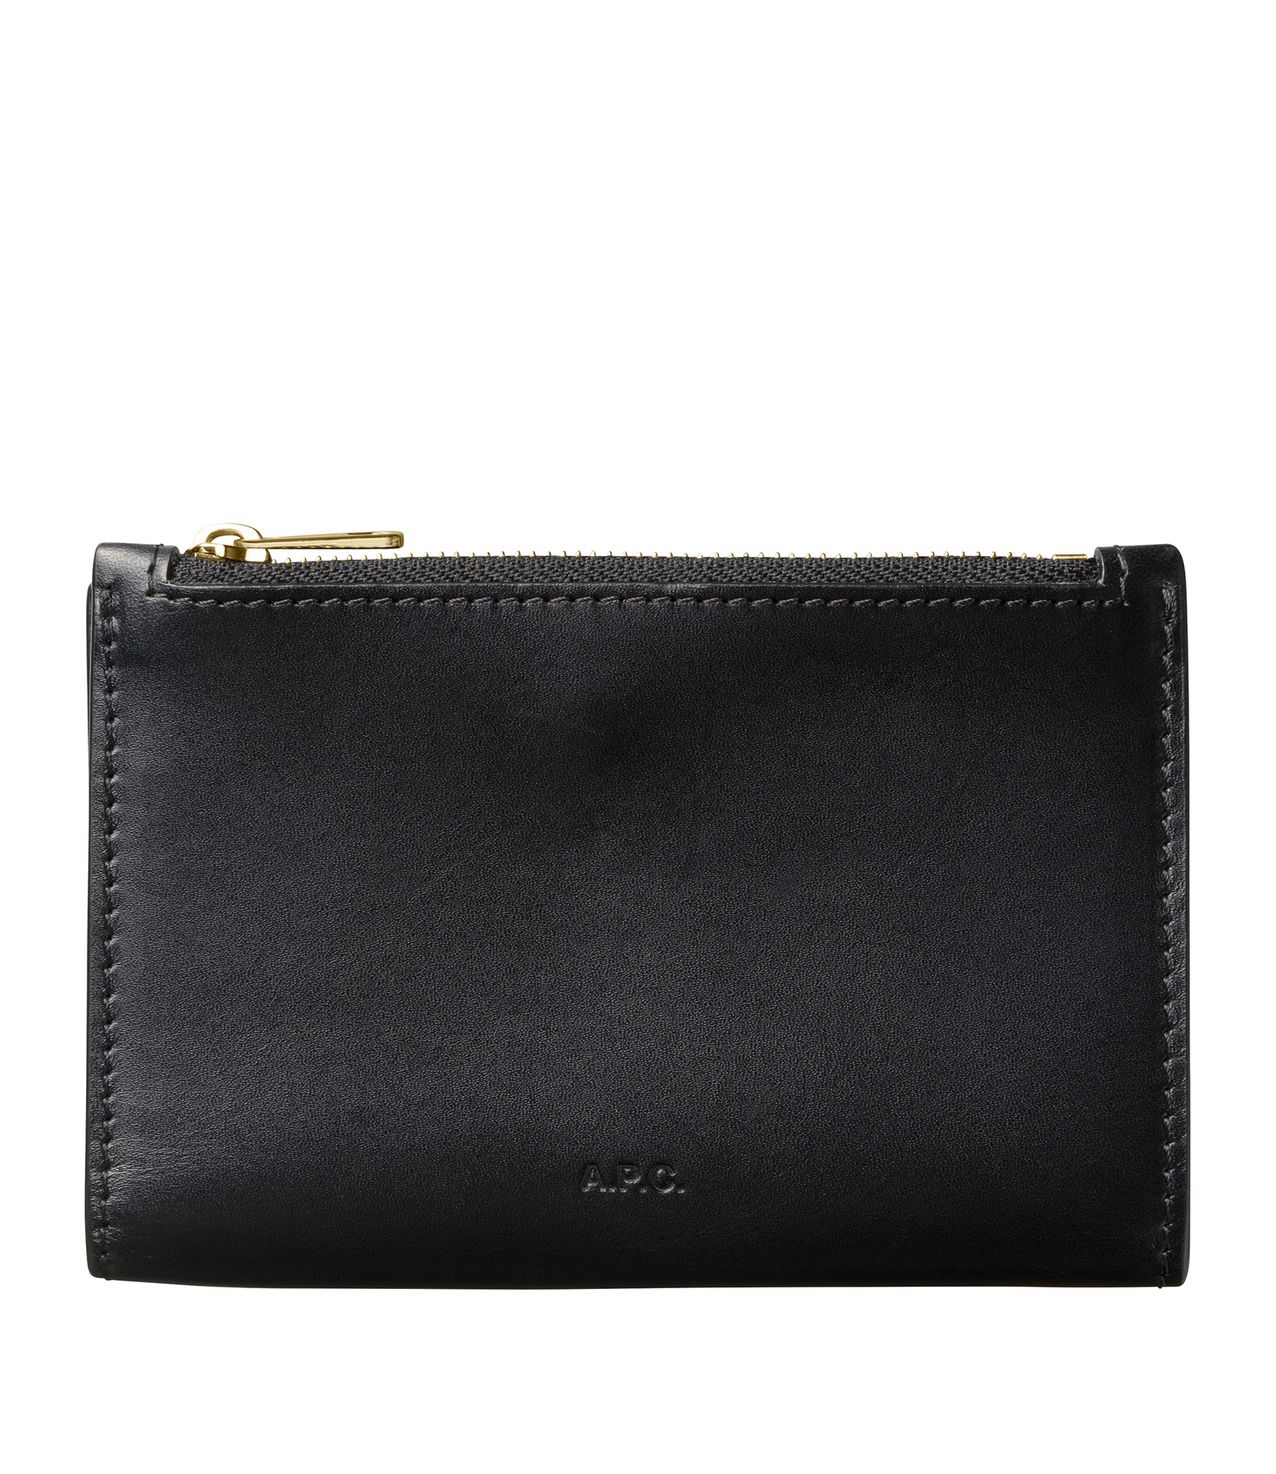 Willy coin purse BLACK APC